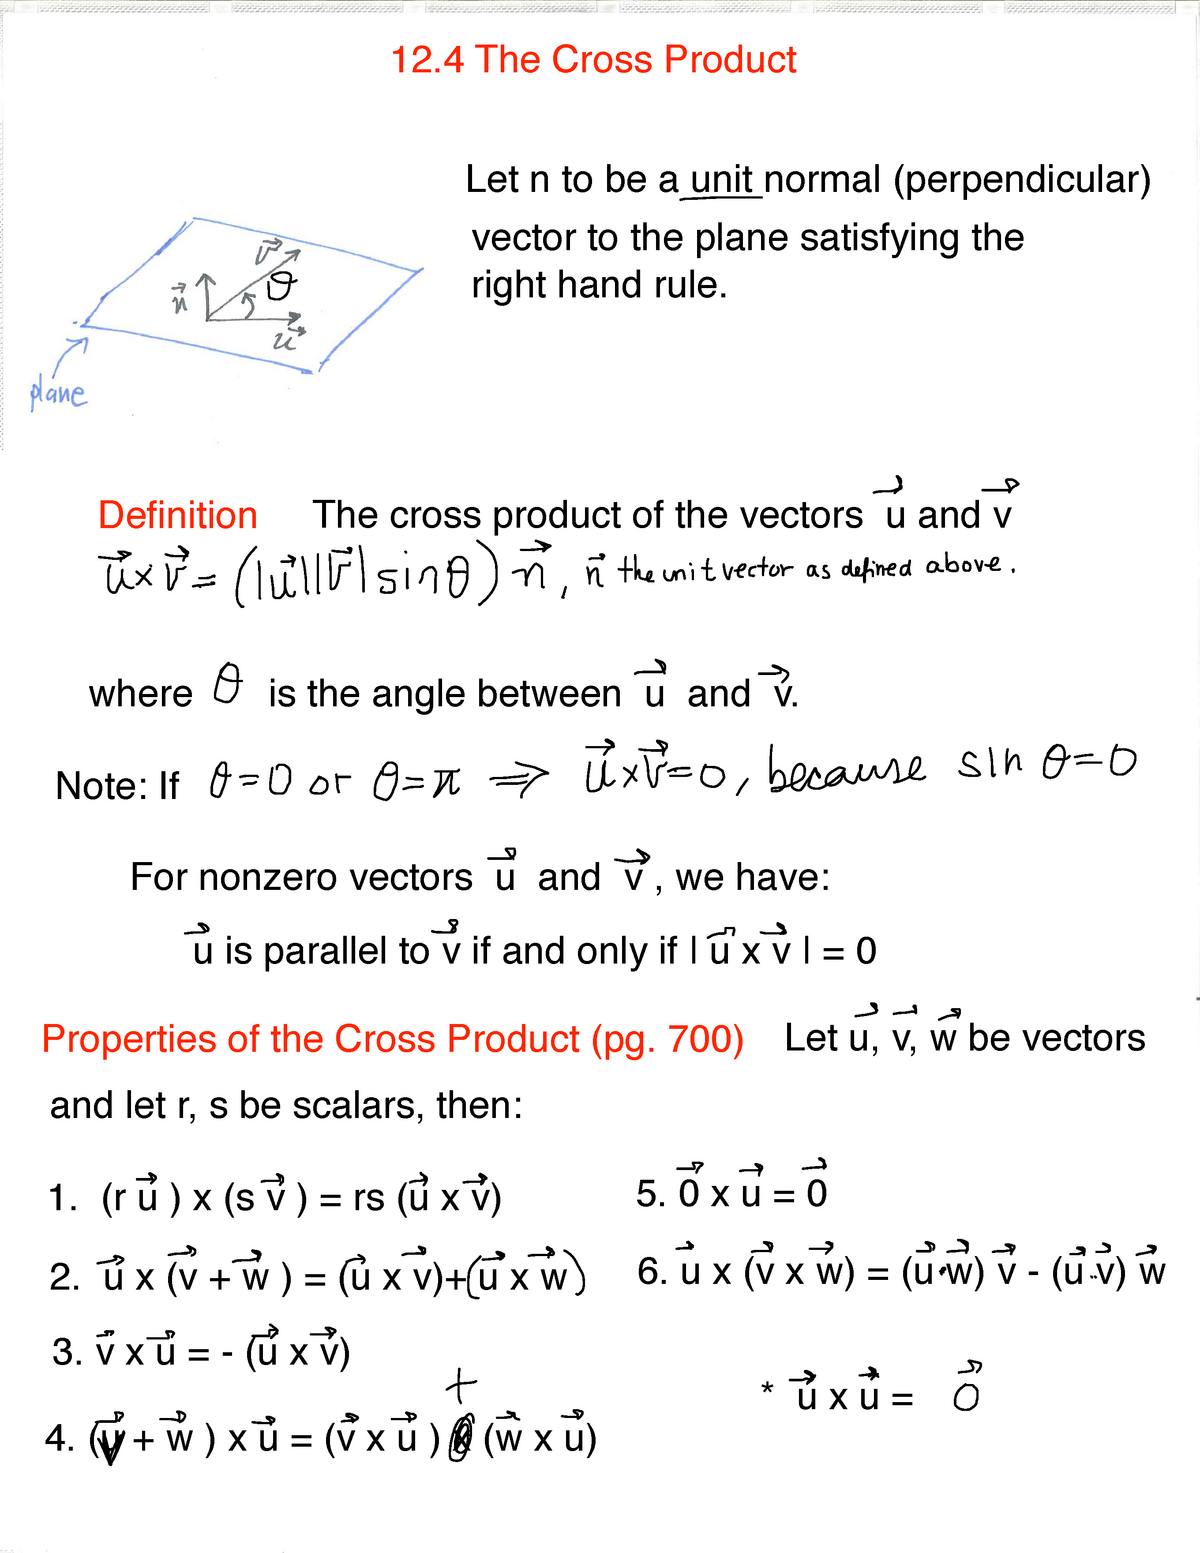 Lecture Notes Lecture Chapter 12 4 12 The Cross Product Let To Be Unit Normal Perpendicular Vector To The Plane Satisfying The Right Hand Rule Definition The Studocu